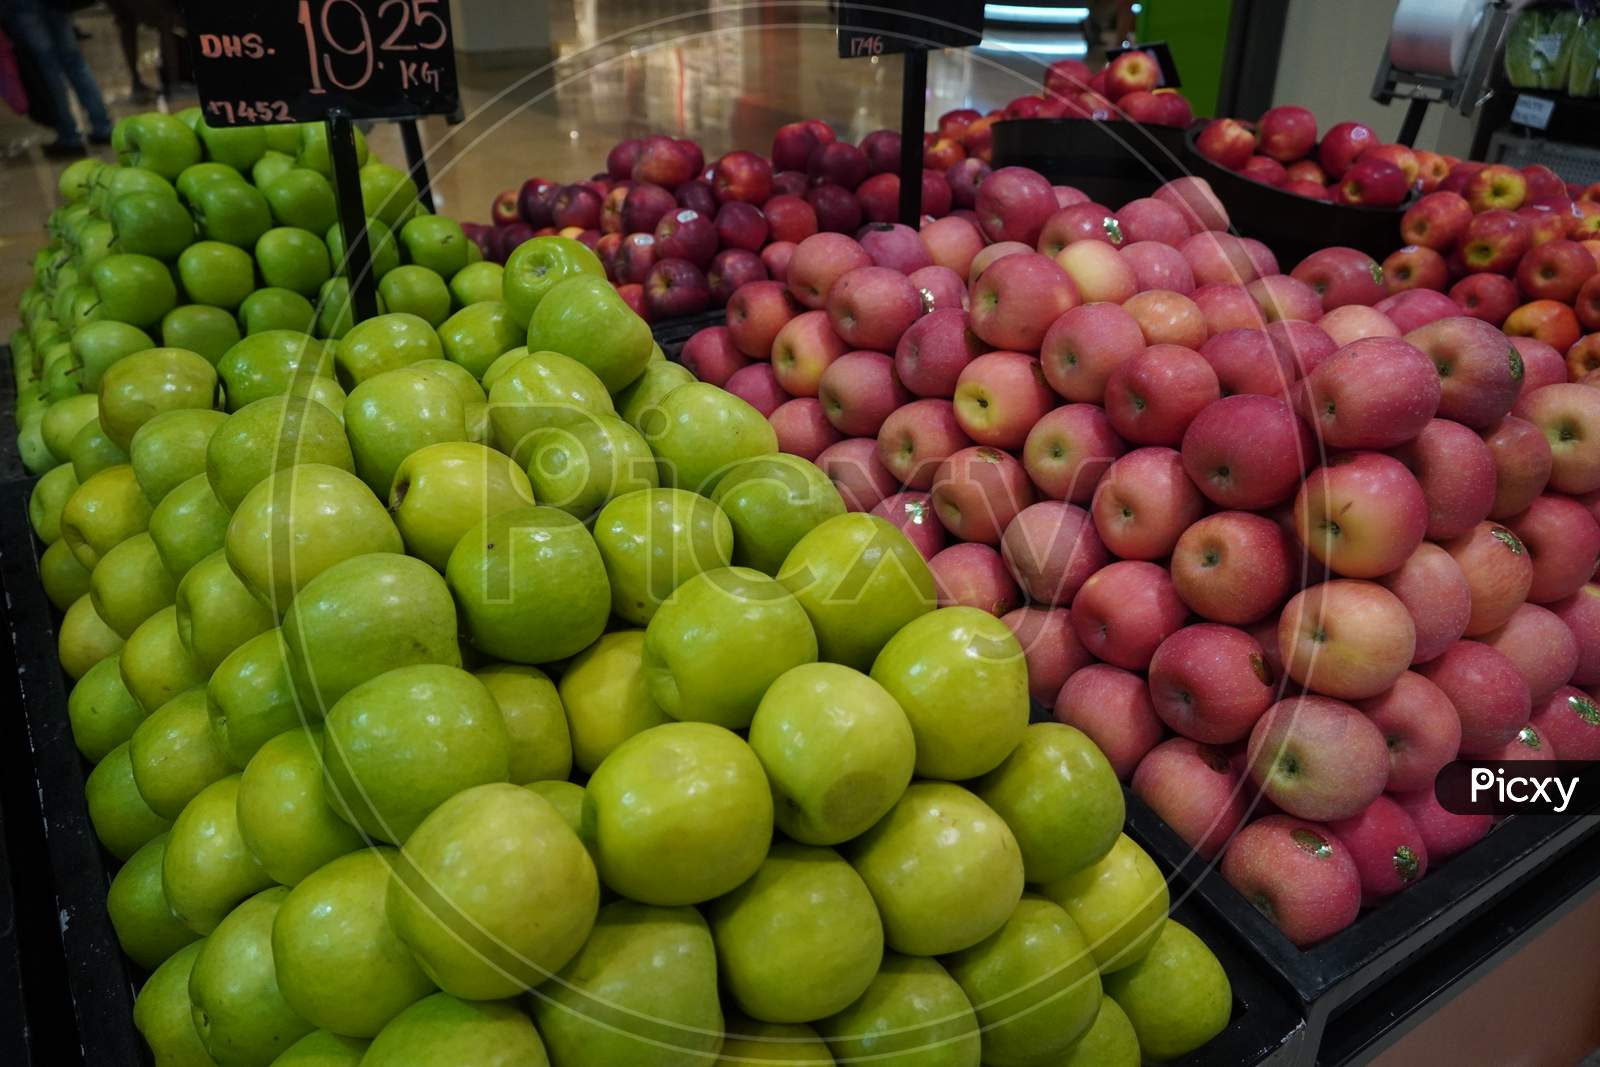 Bunch Of Green And Pink Apples On Boxes In Supermarket. Apples Being Sold At Public Market. Organic Food Fresh Apples In Shop, Store - Dubai Uae December 2019